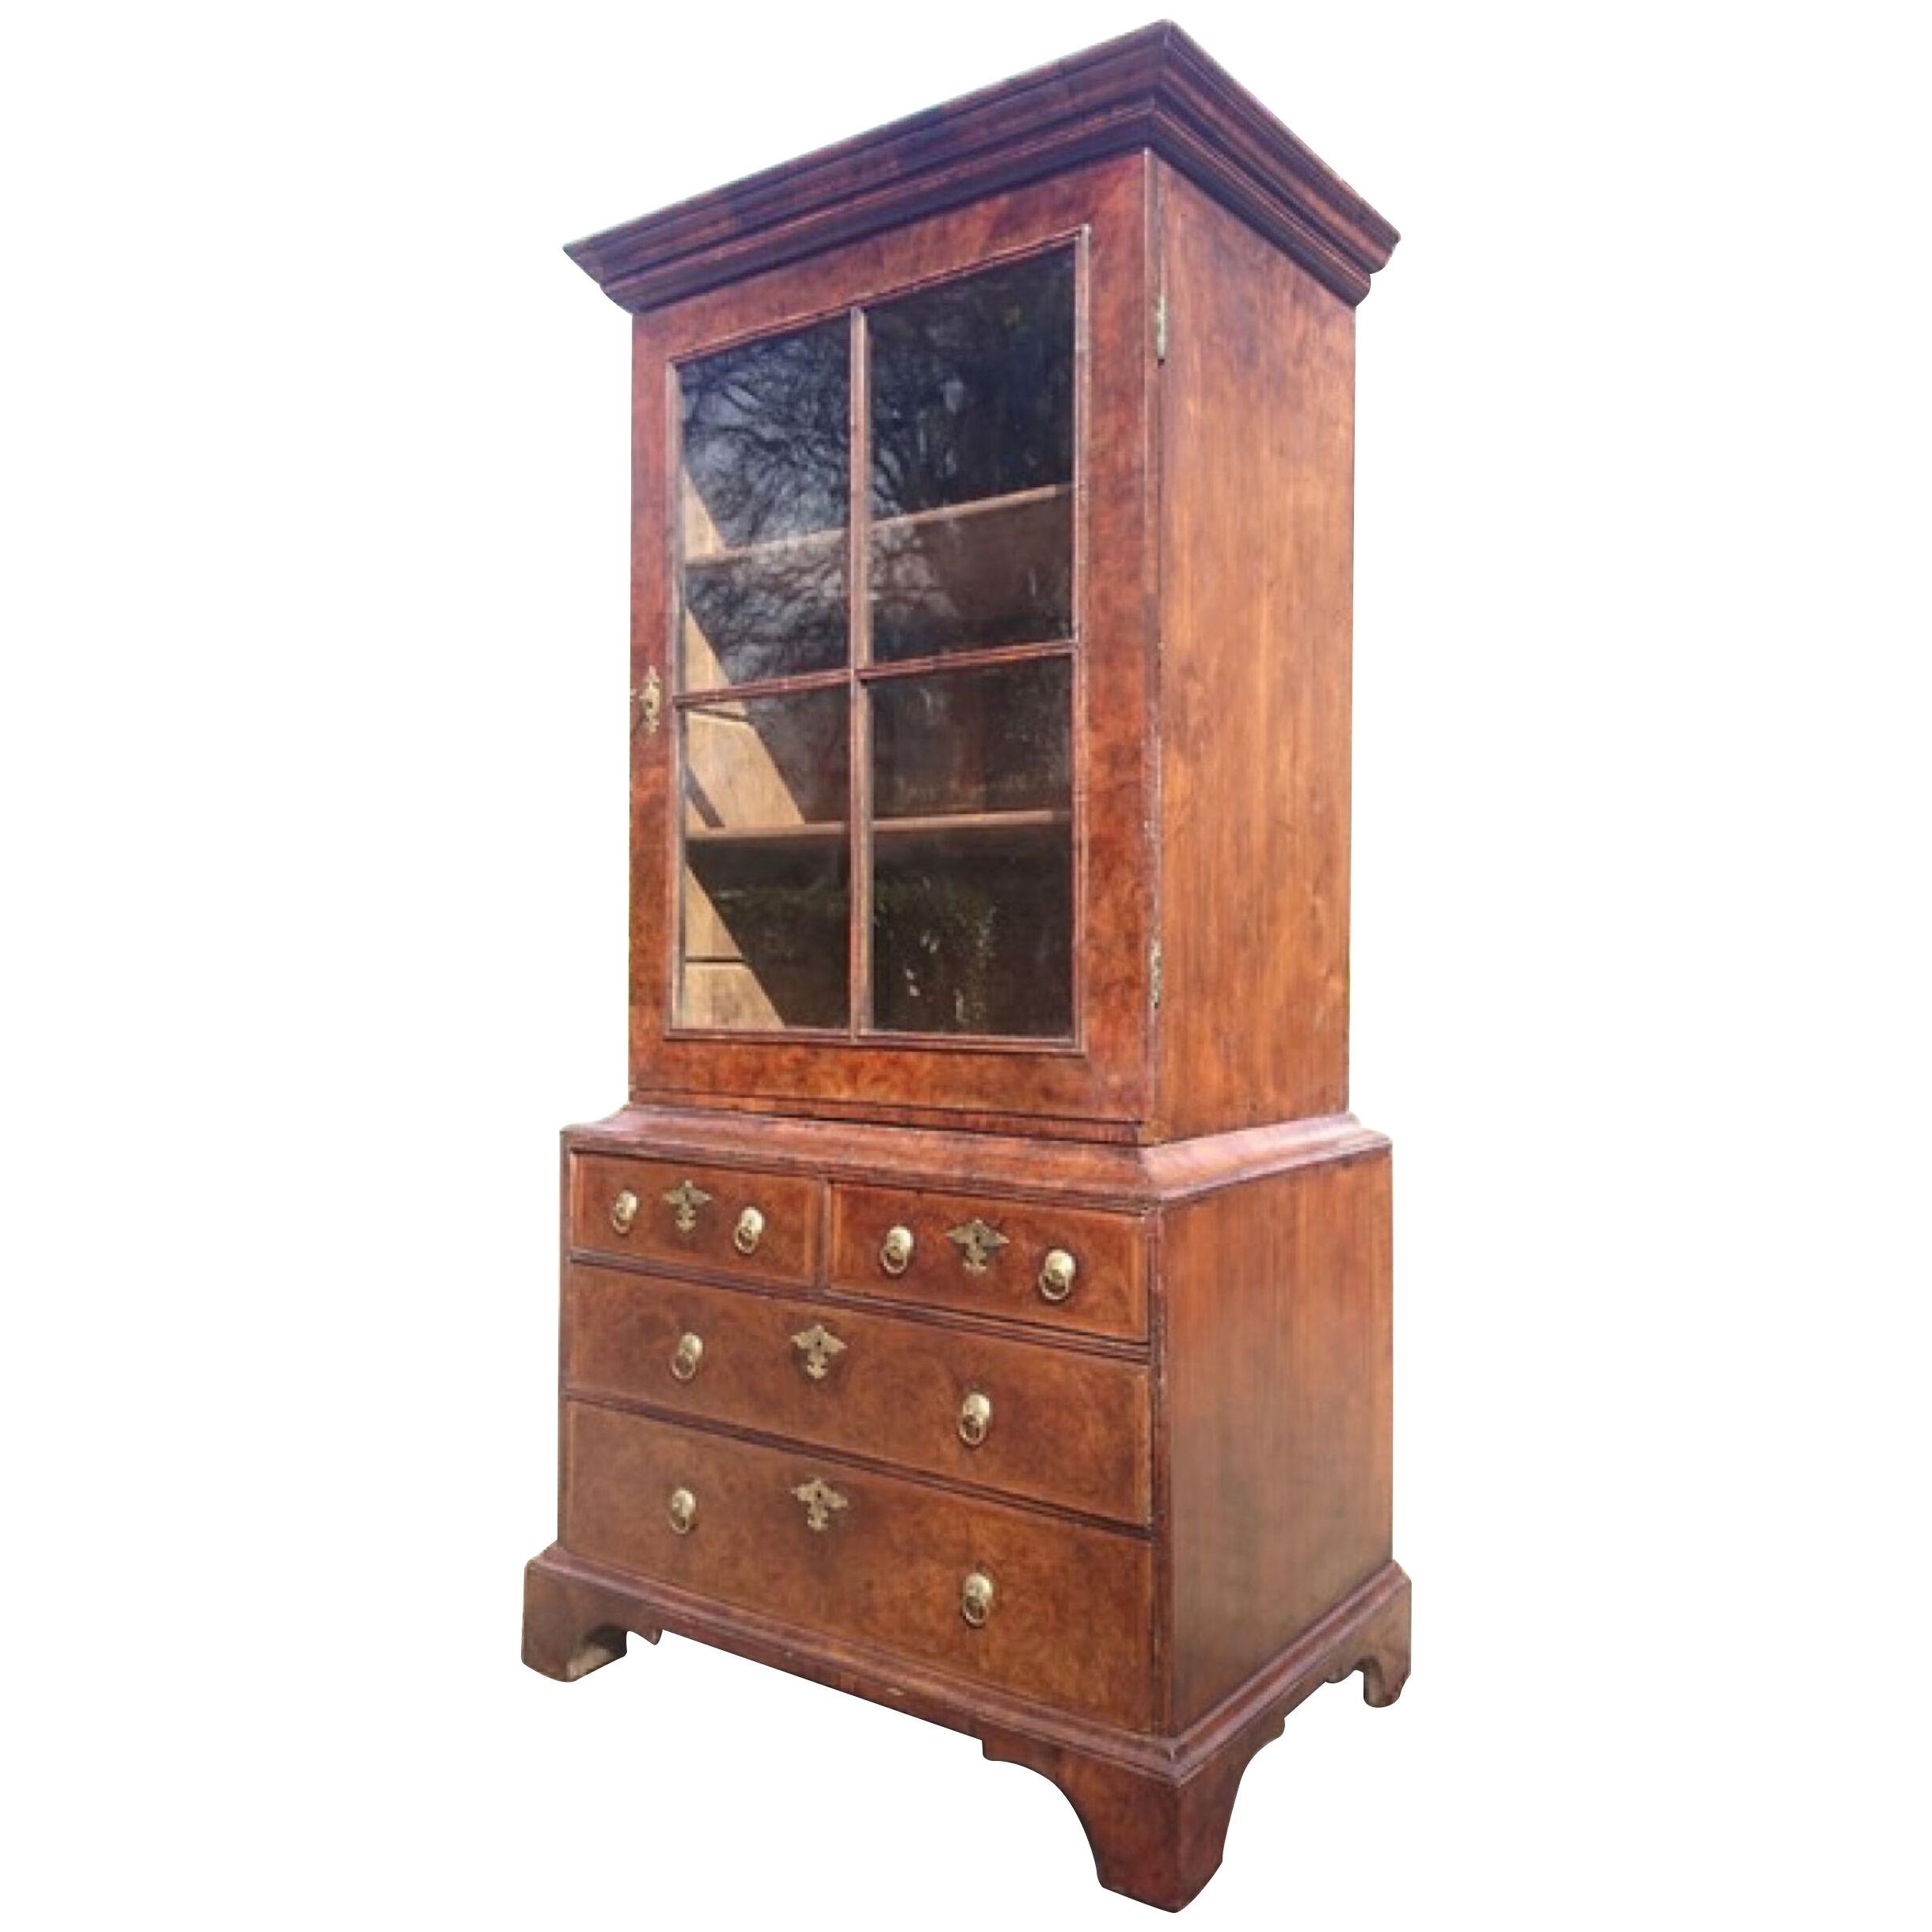 Early 18th Century Antique Walnut Cabinet / Bookcase